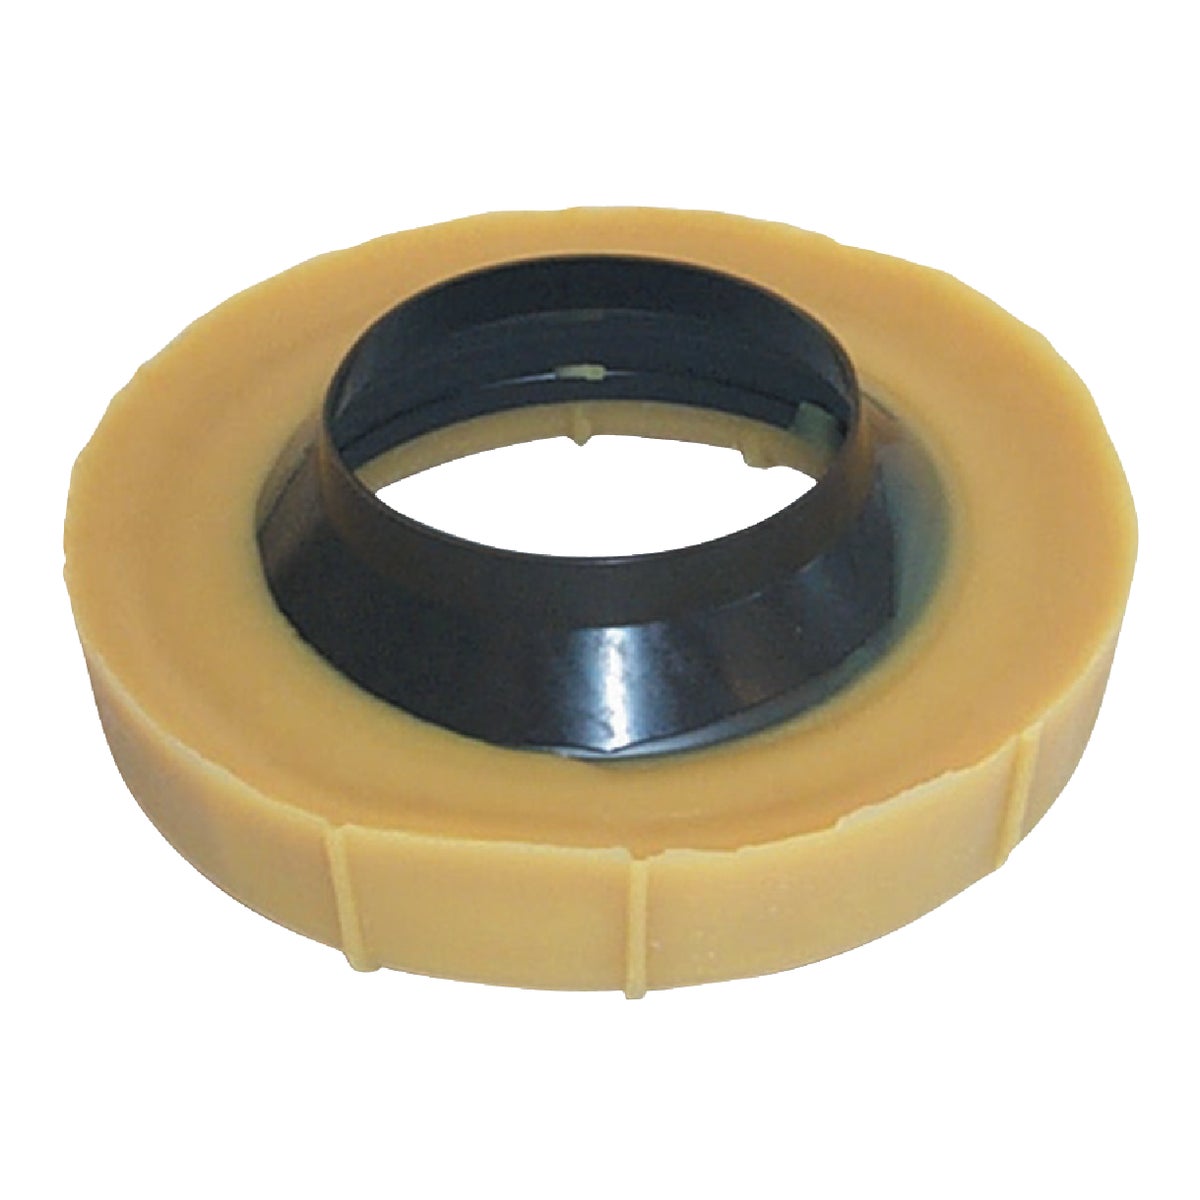 Item 411904, Standard size. Fits 3" and 4" lines for floor toilet bowls.